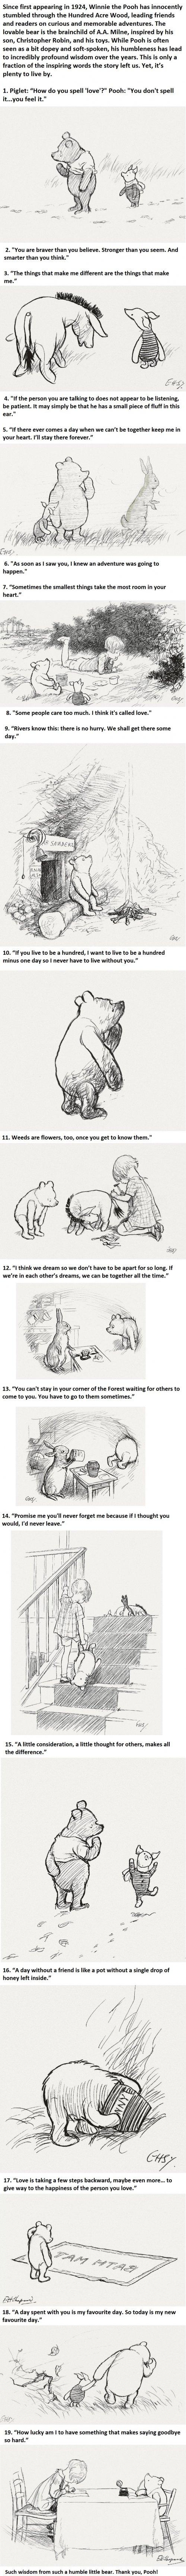  19 Incredibly Wise Truths We Learned From Winnie The Pooh -   Misc